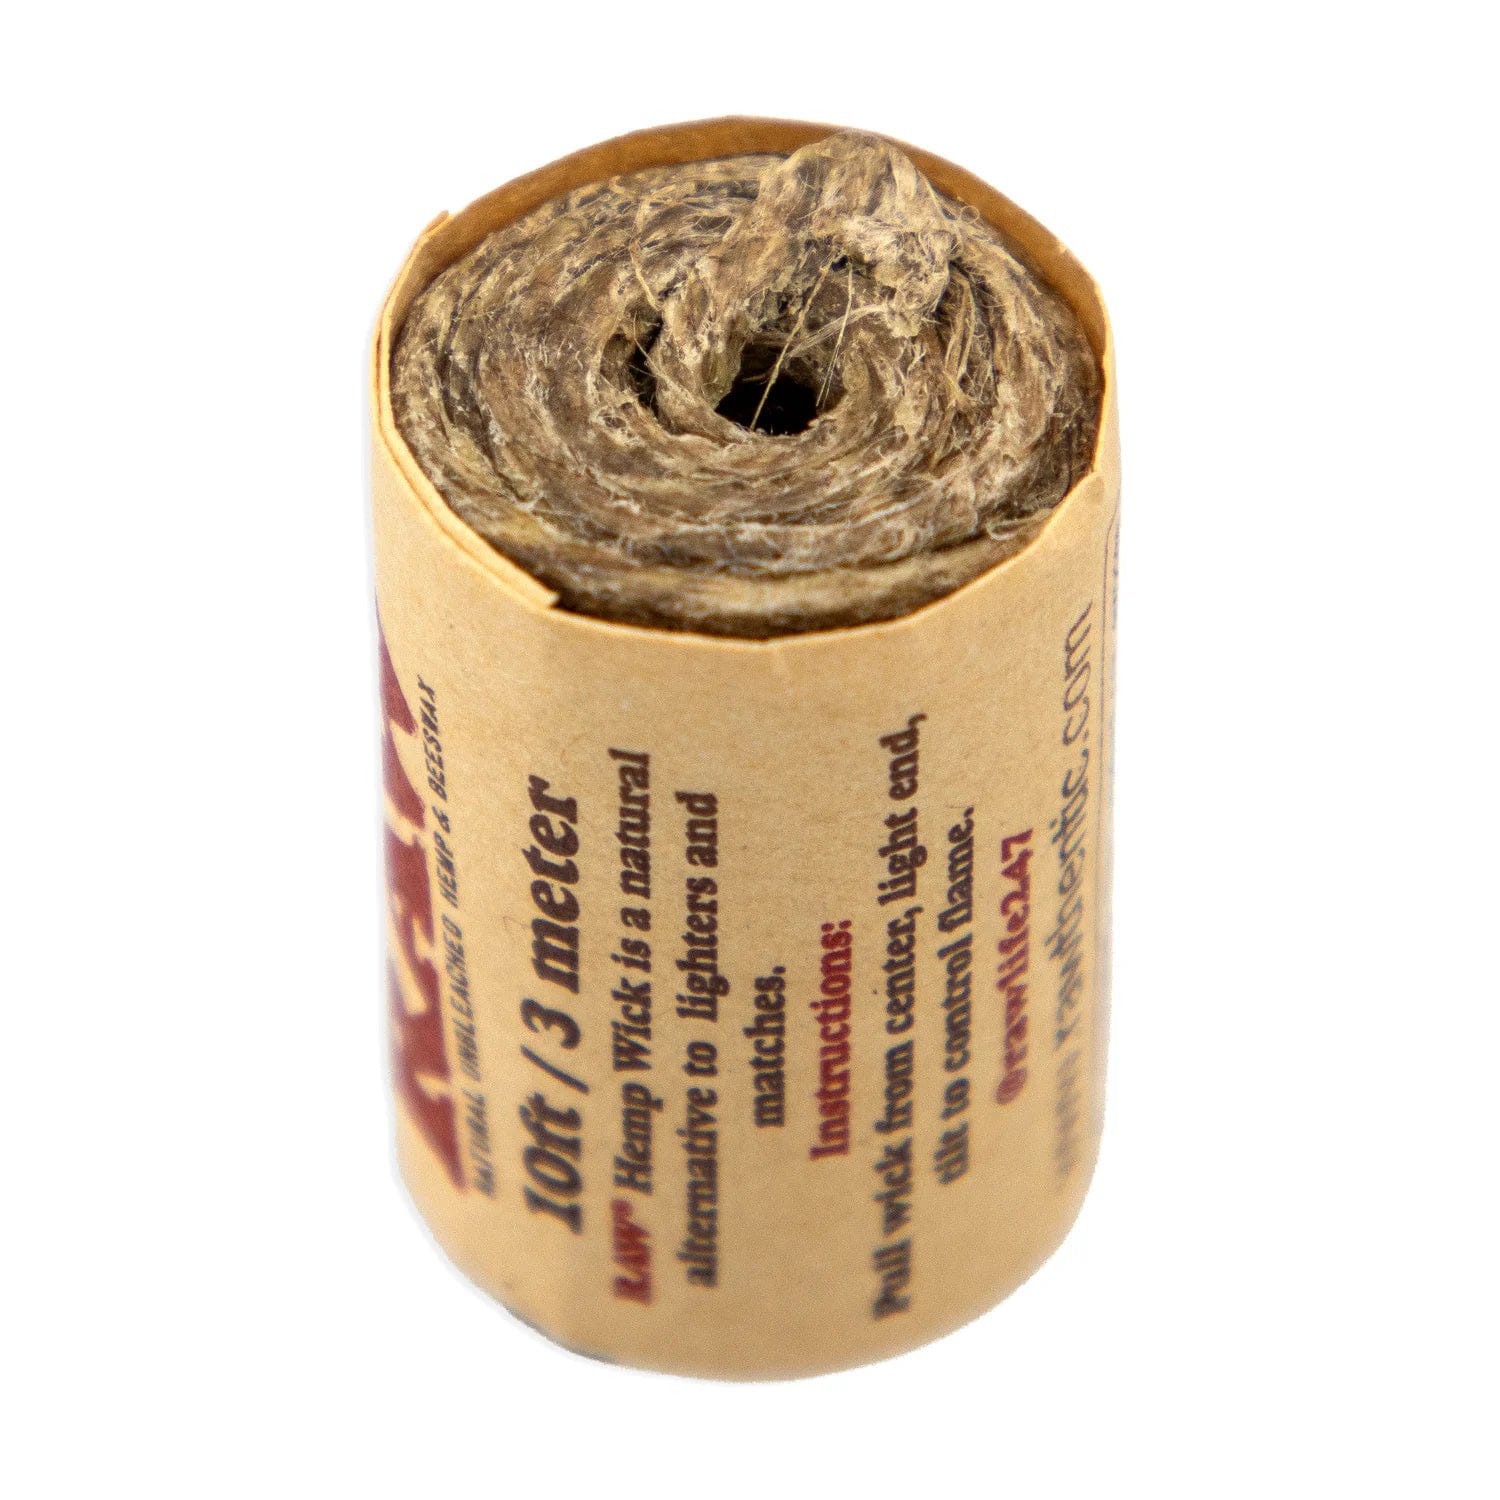 Best Prices For RAW- HEMP WICK 3 METER (10FT) ROLL - DISPLAY OF 40 (RAW-12)